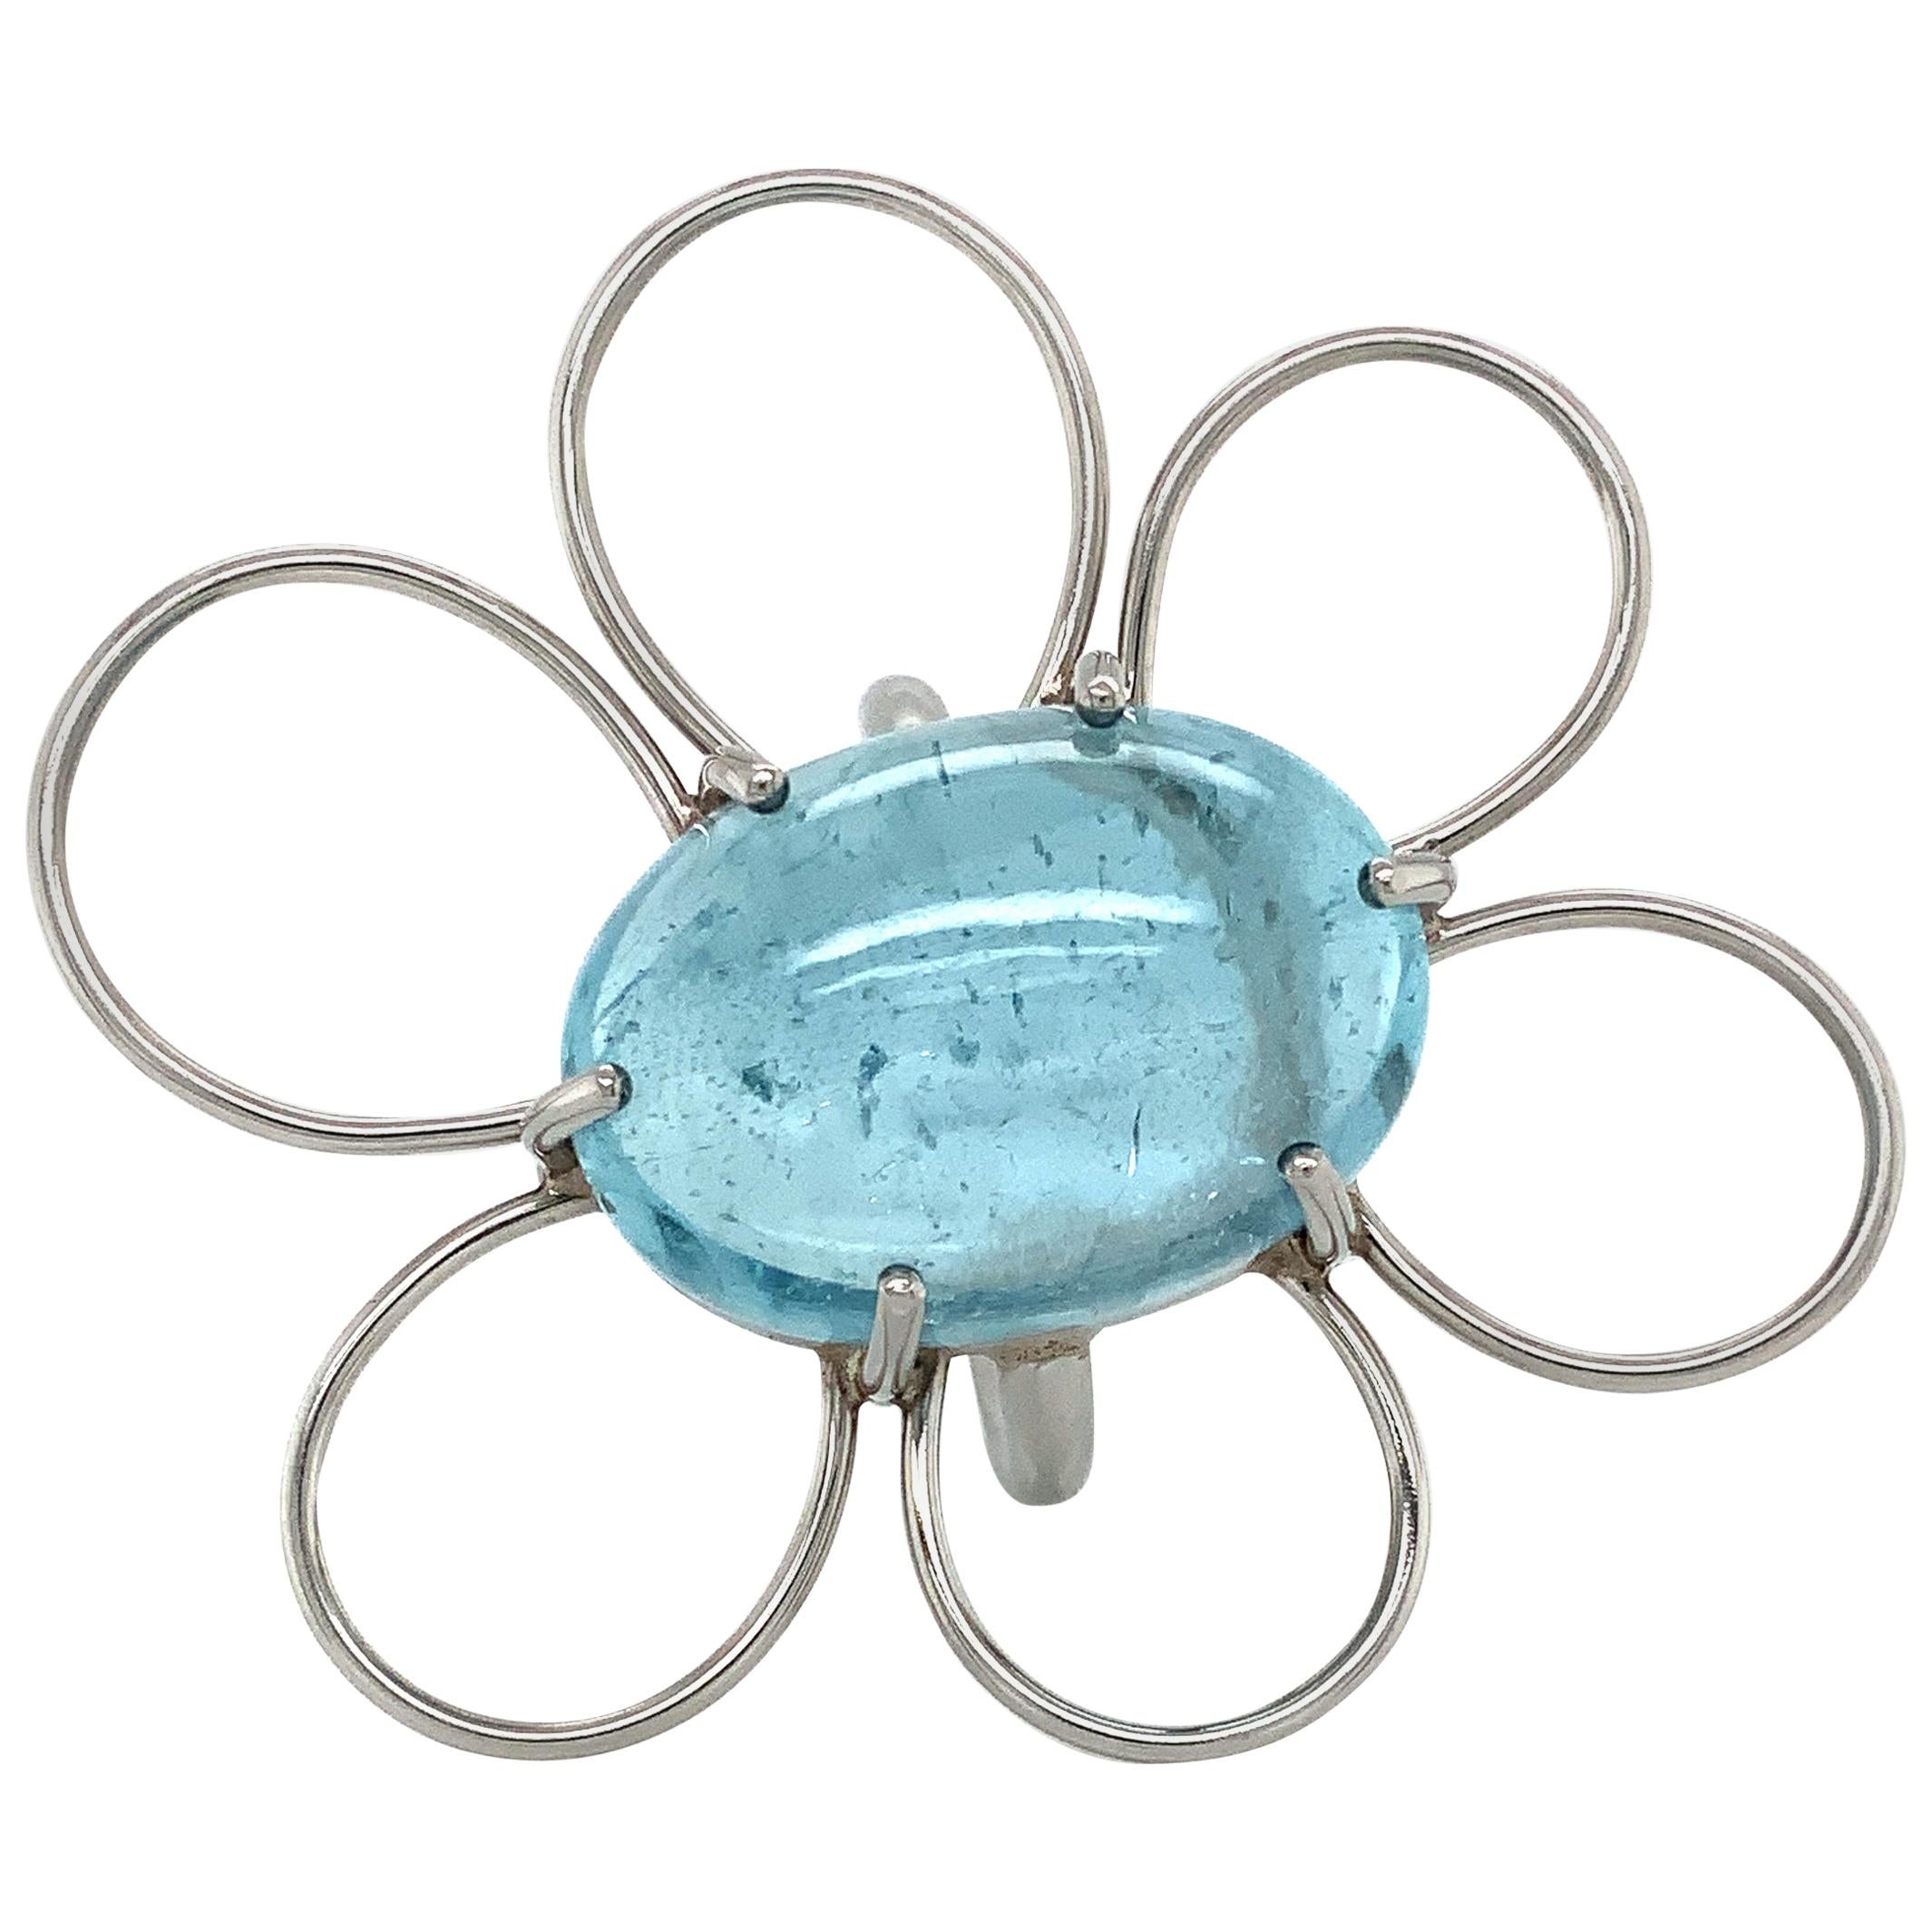 Georg Spreng - Quick Bug Ring Platinum 950 with Blue Aquamarine oval Cabochon For Sale